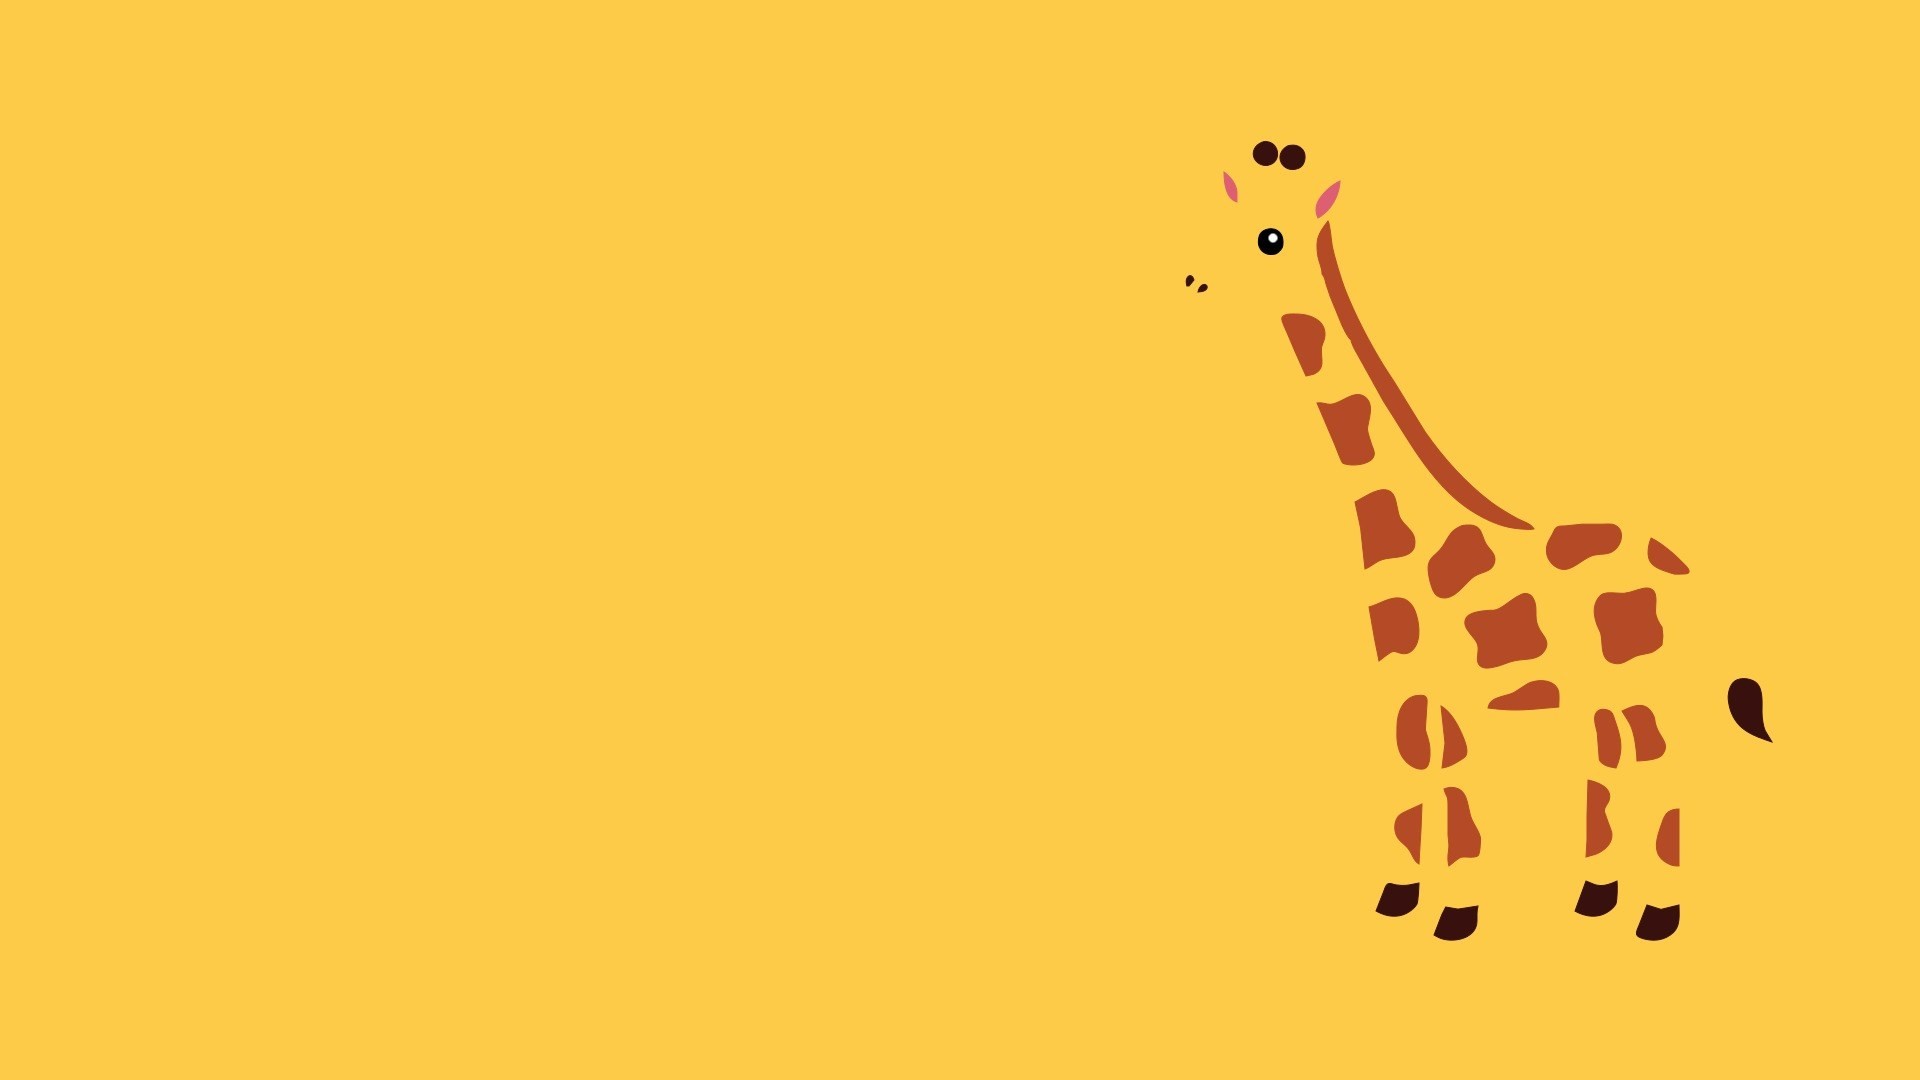 1920x1080 ... Wallpapers-Web Pack II; Funny Giraffe, April 8, 2015 | Pictures PC  Gallery, 57.3 Kb ...